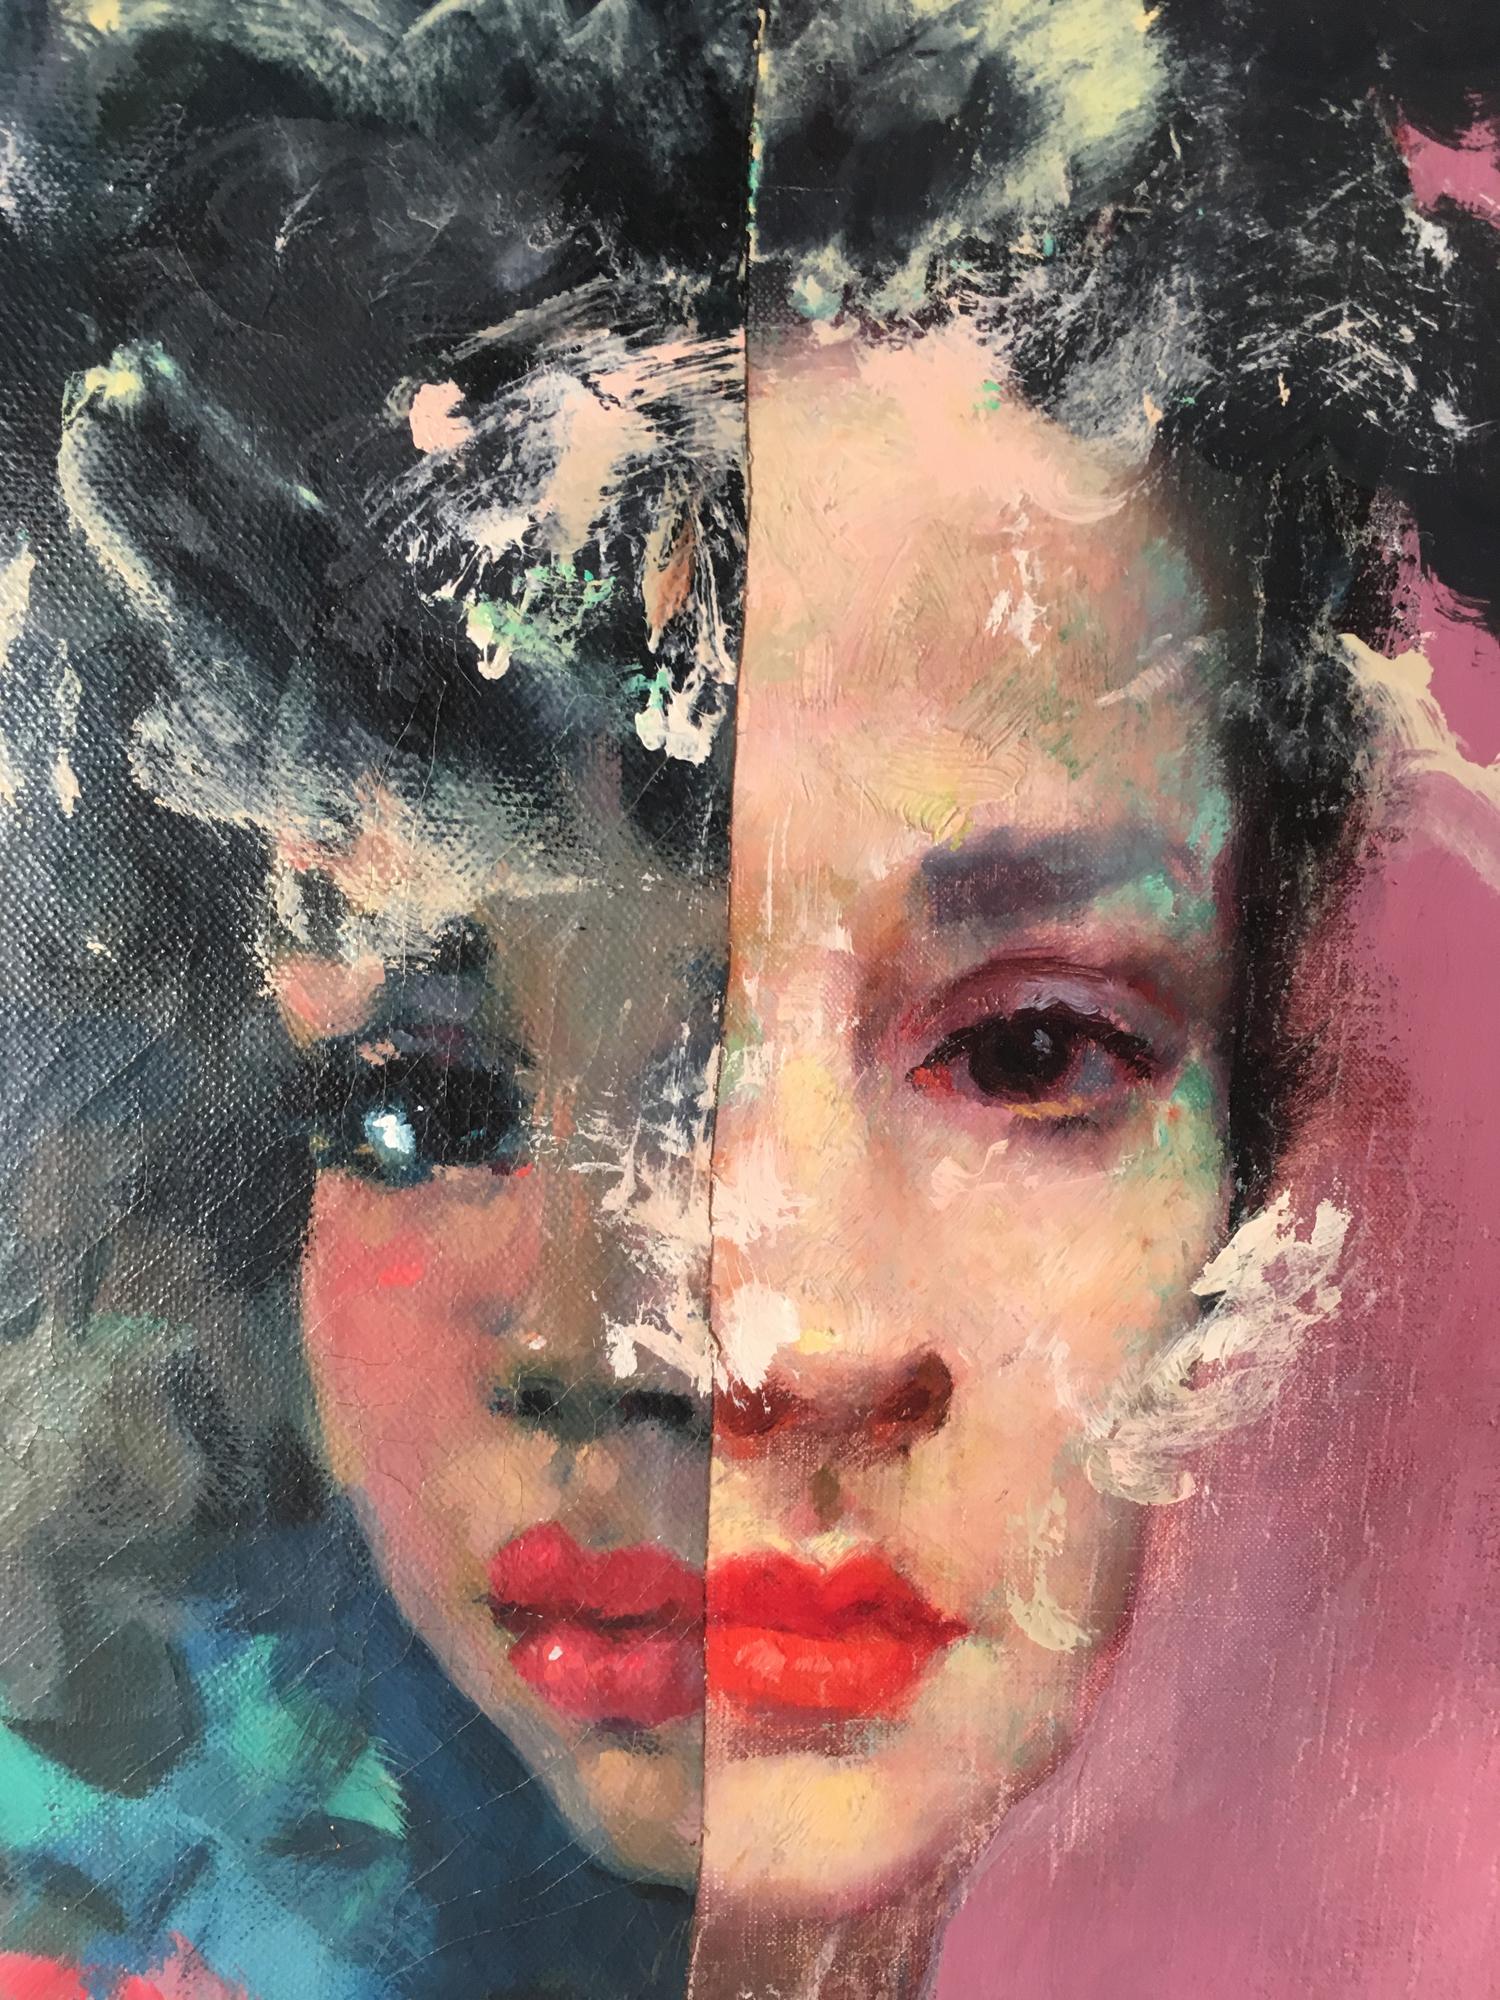 John Baker’s “Urban Melancholy: An Imaginary Portrait” is an acrylic painting on canvas with collage 20 x 16 x 1.5 inches that compounds the reflective sadness of two sisters, one a teenager the other in her twenties. Although the mid-range blues